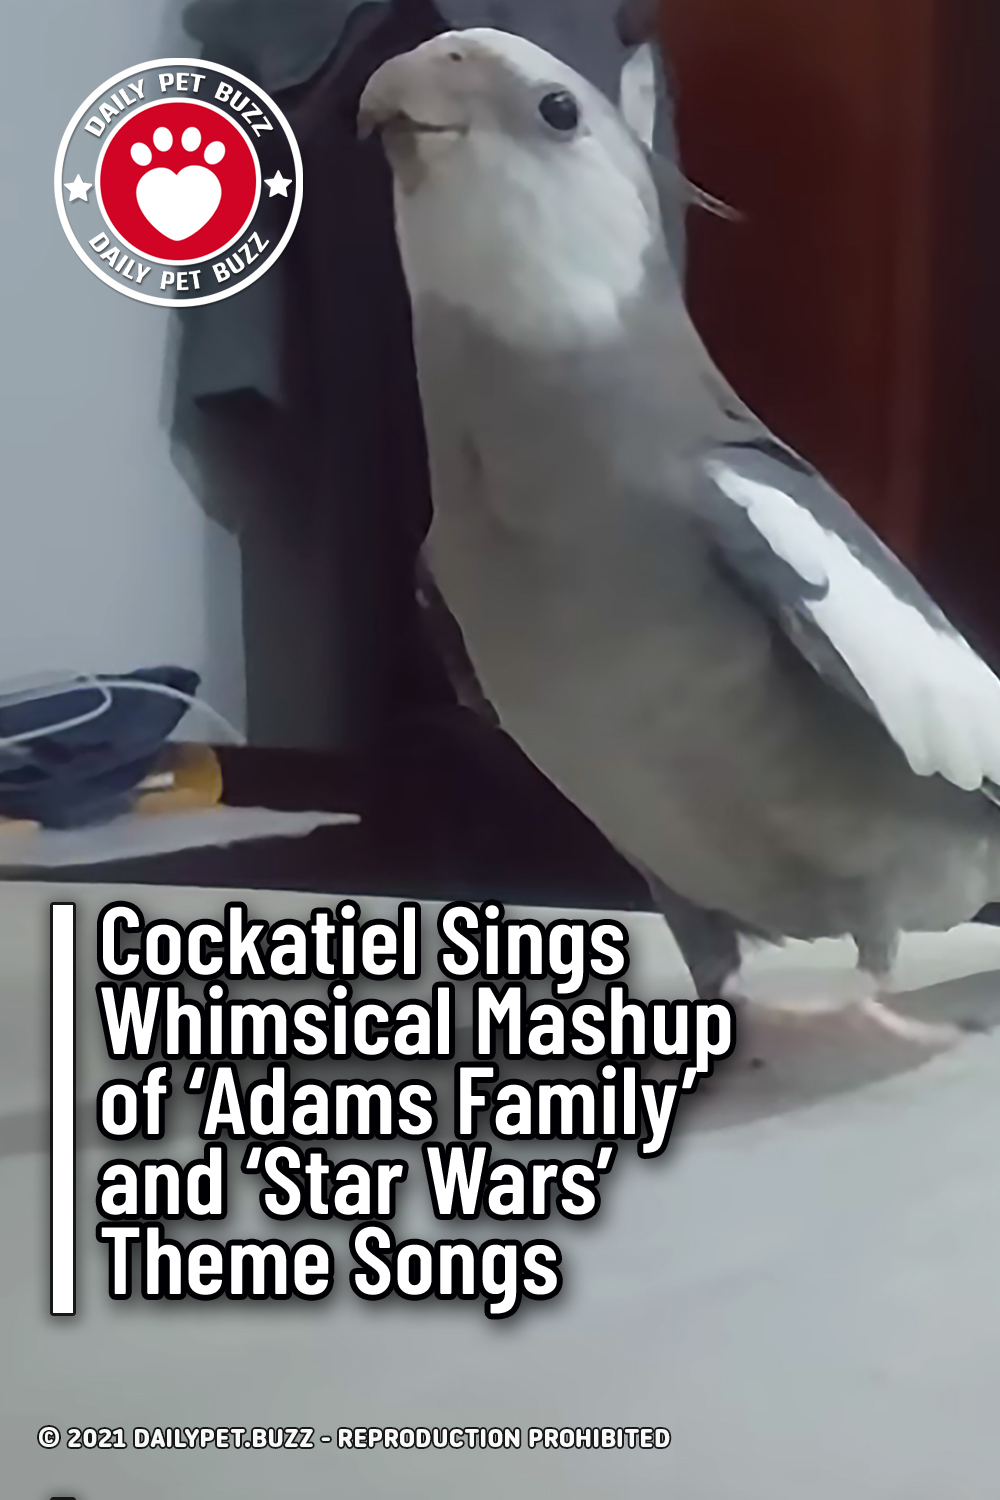 Cockatiel Sings Whimsical Mashup of \'Adams Family\' and \'Star Wars\' Theme Songs